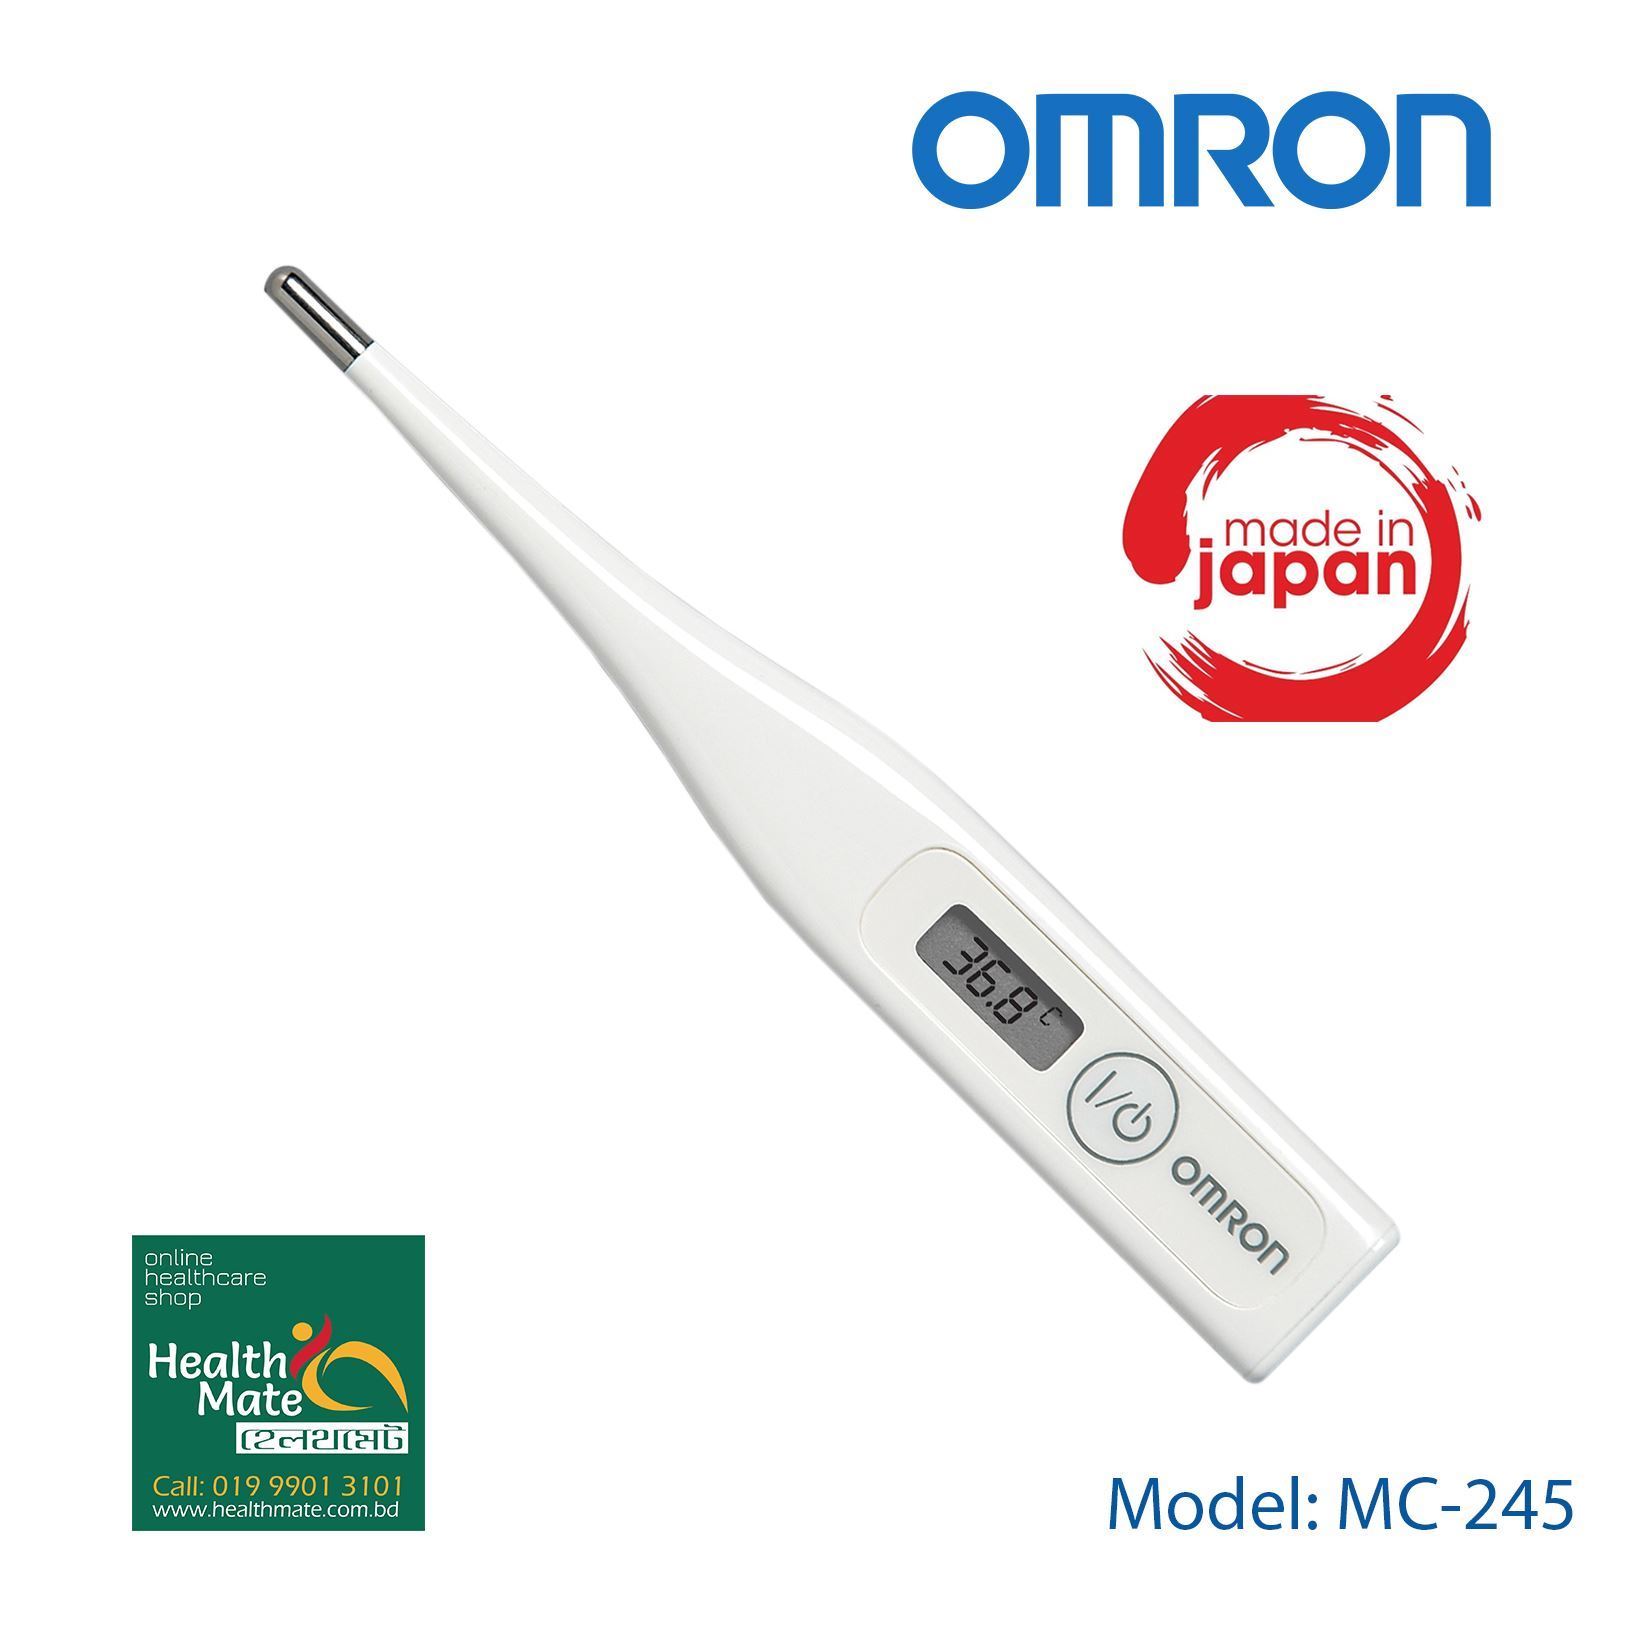 Omron Digital Thermometer MC 245 – Made in Japan